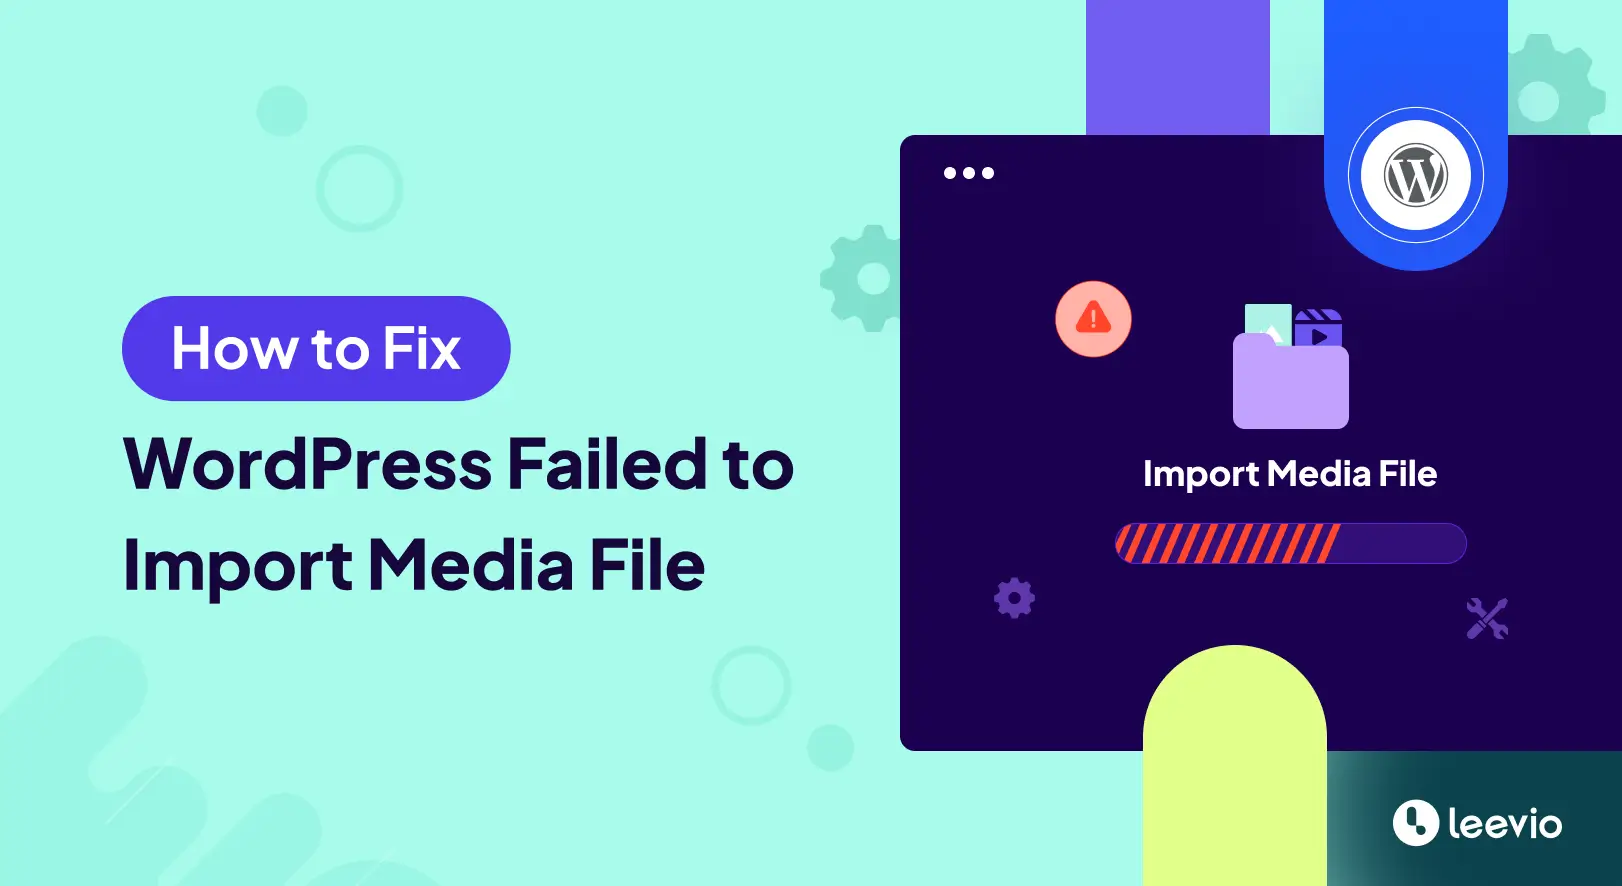 How to Fix WordPress Failed to Import Media File